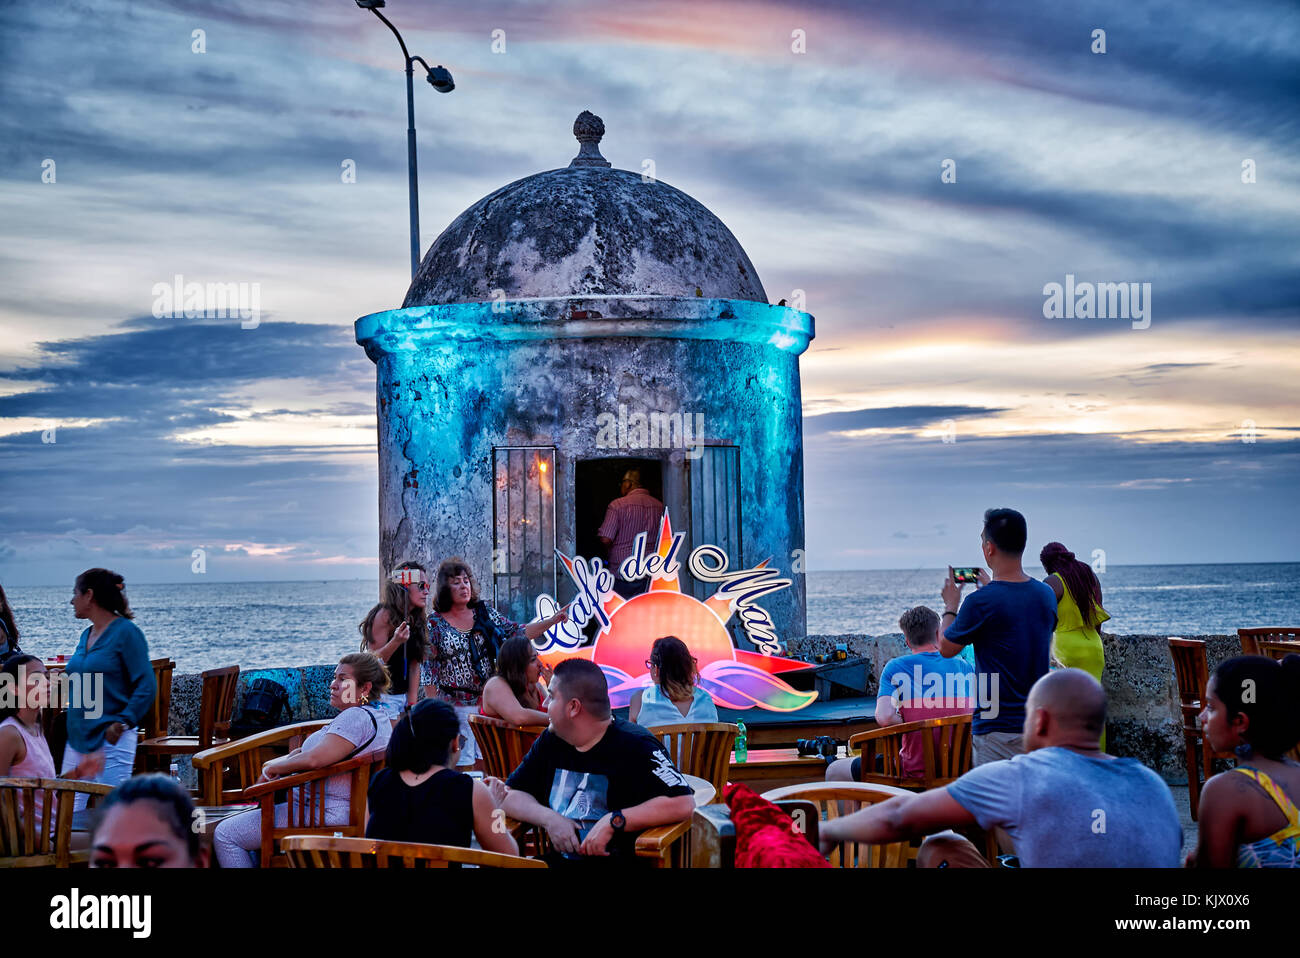 sunset at Cafe del Mar, Cartagena de Indias, Colombia, South America Stock Photo